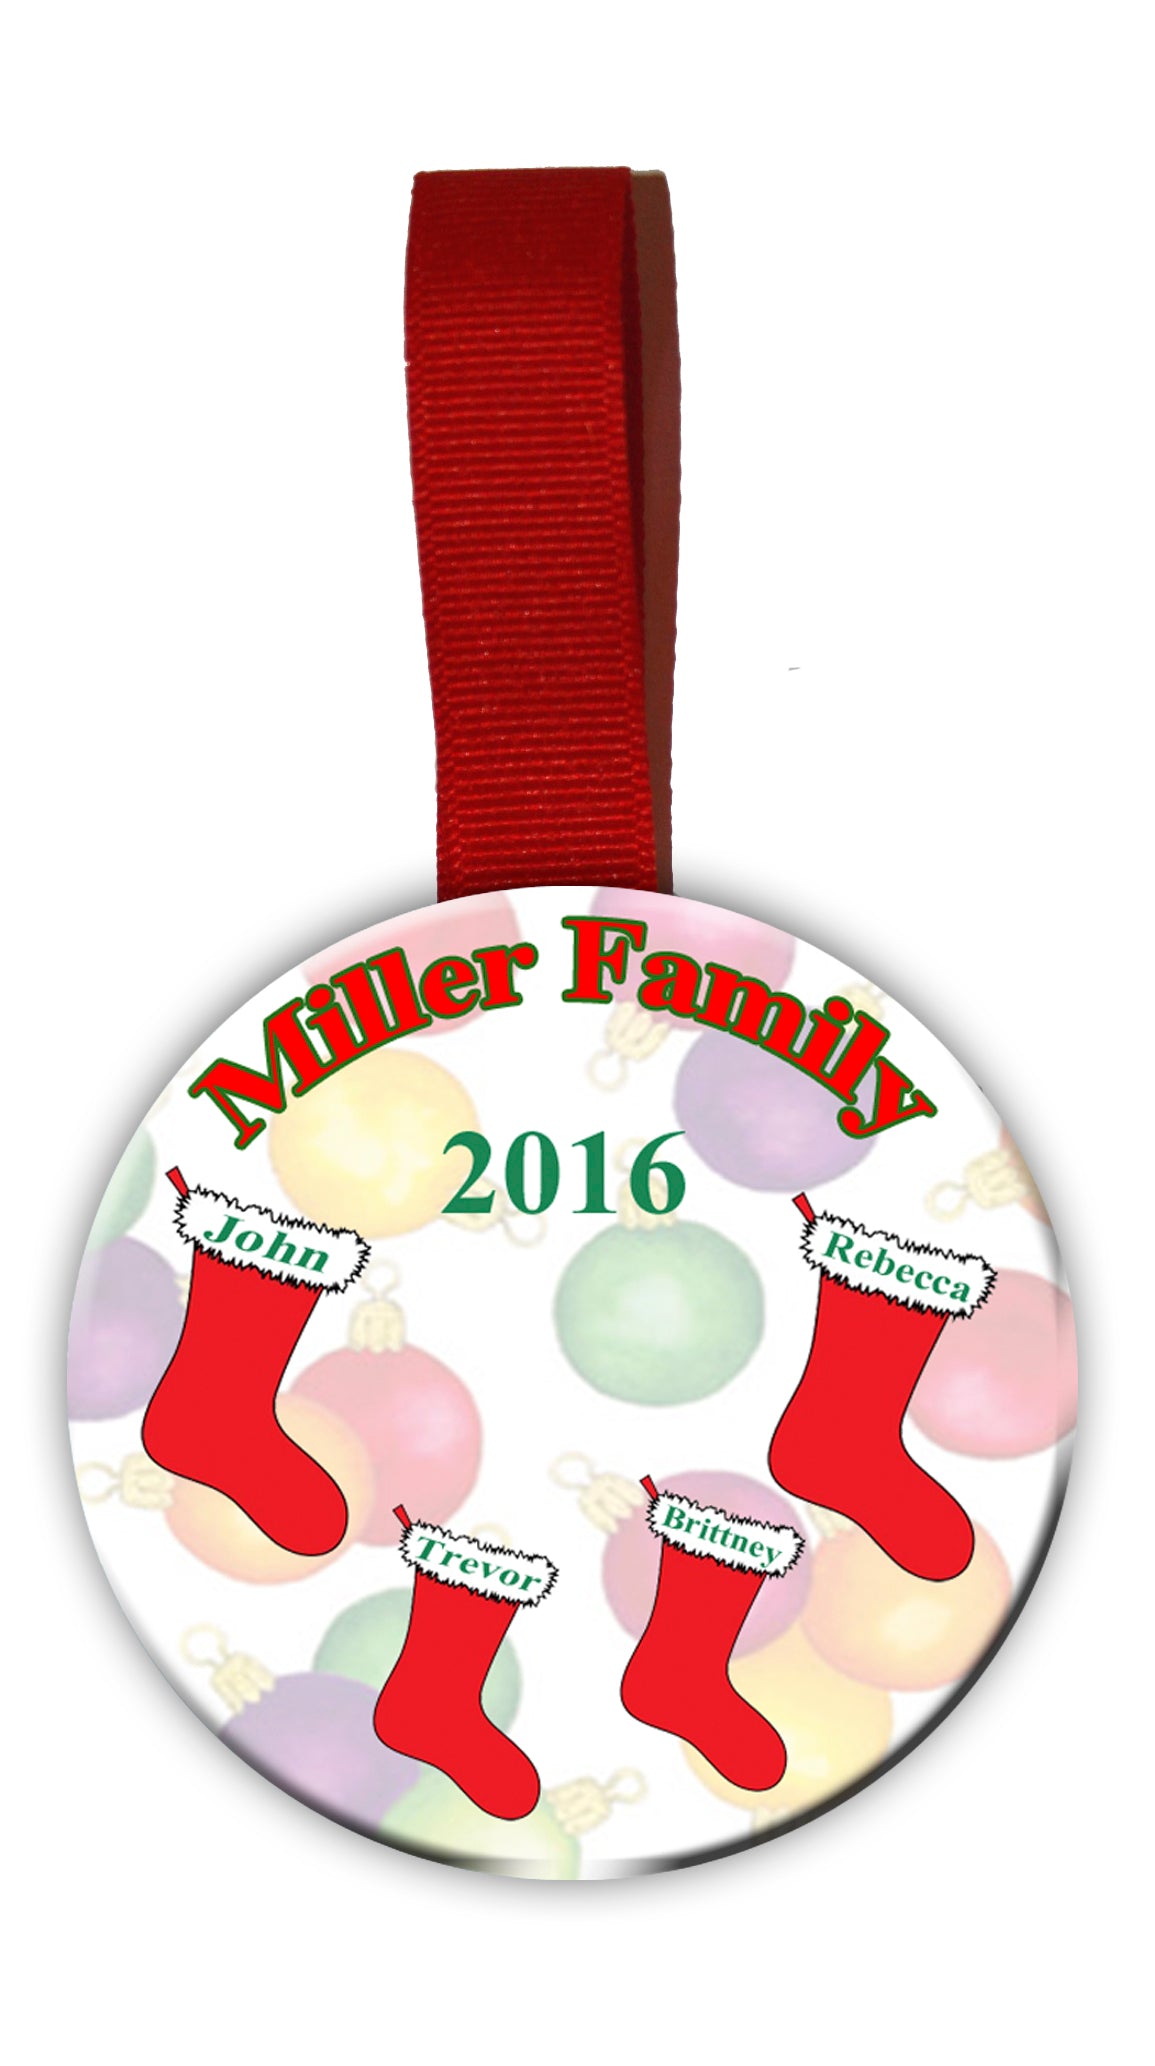 Christmas Tree Ornament Featuring the Family Name and Each Member Name on Stockings